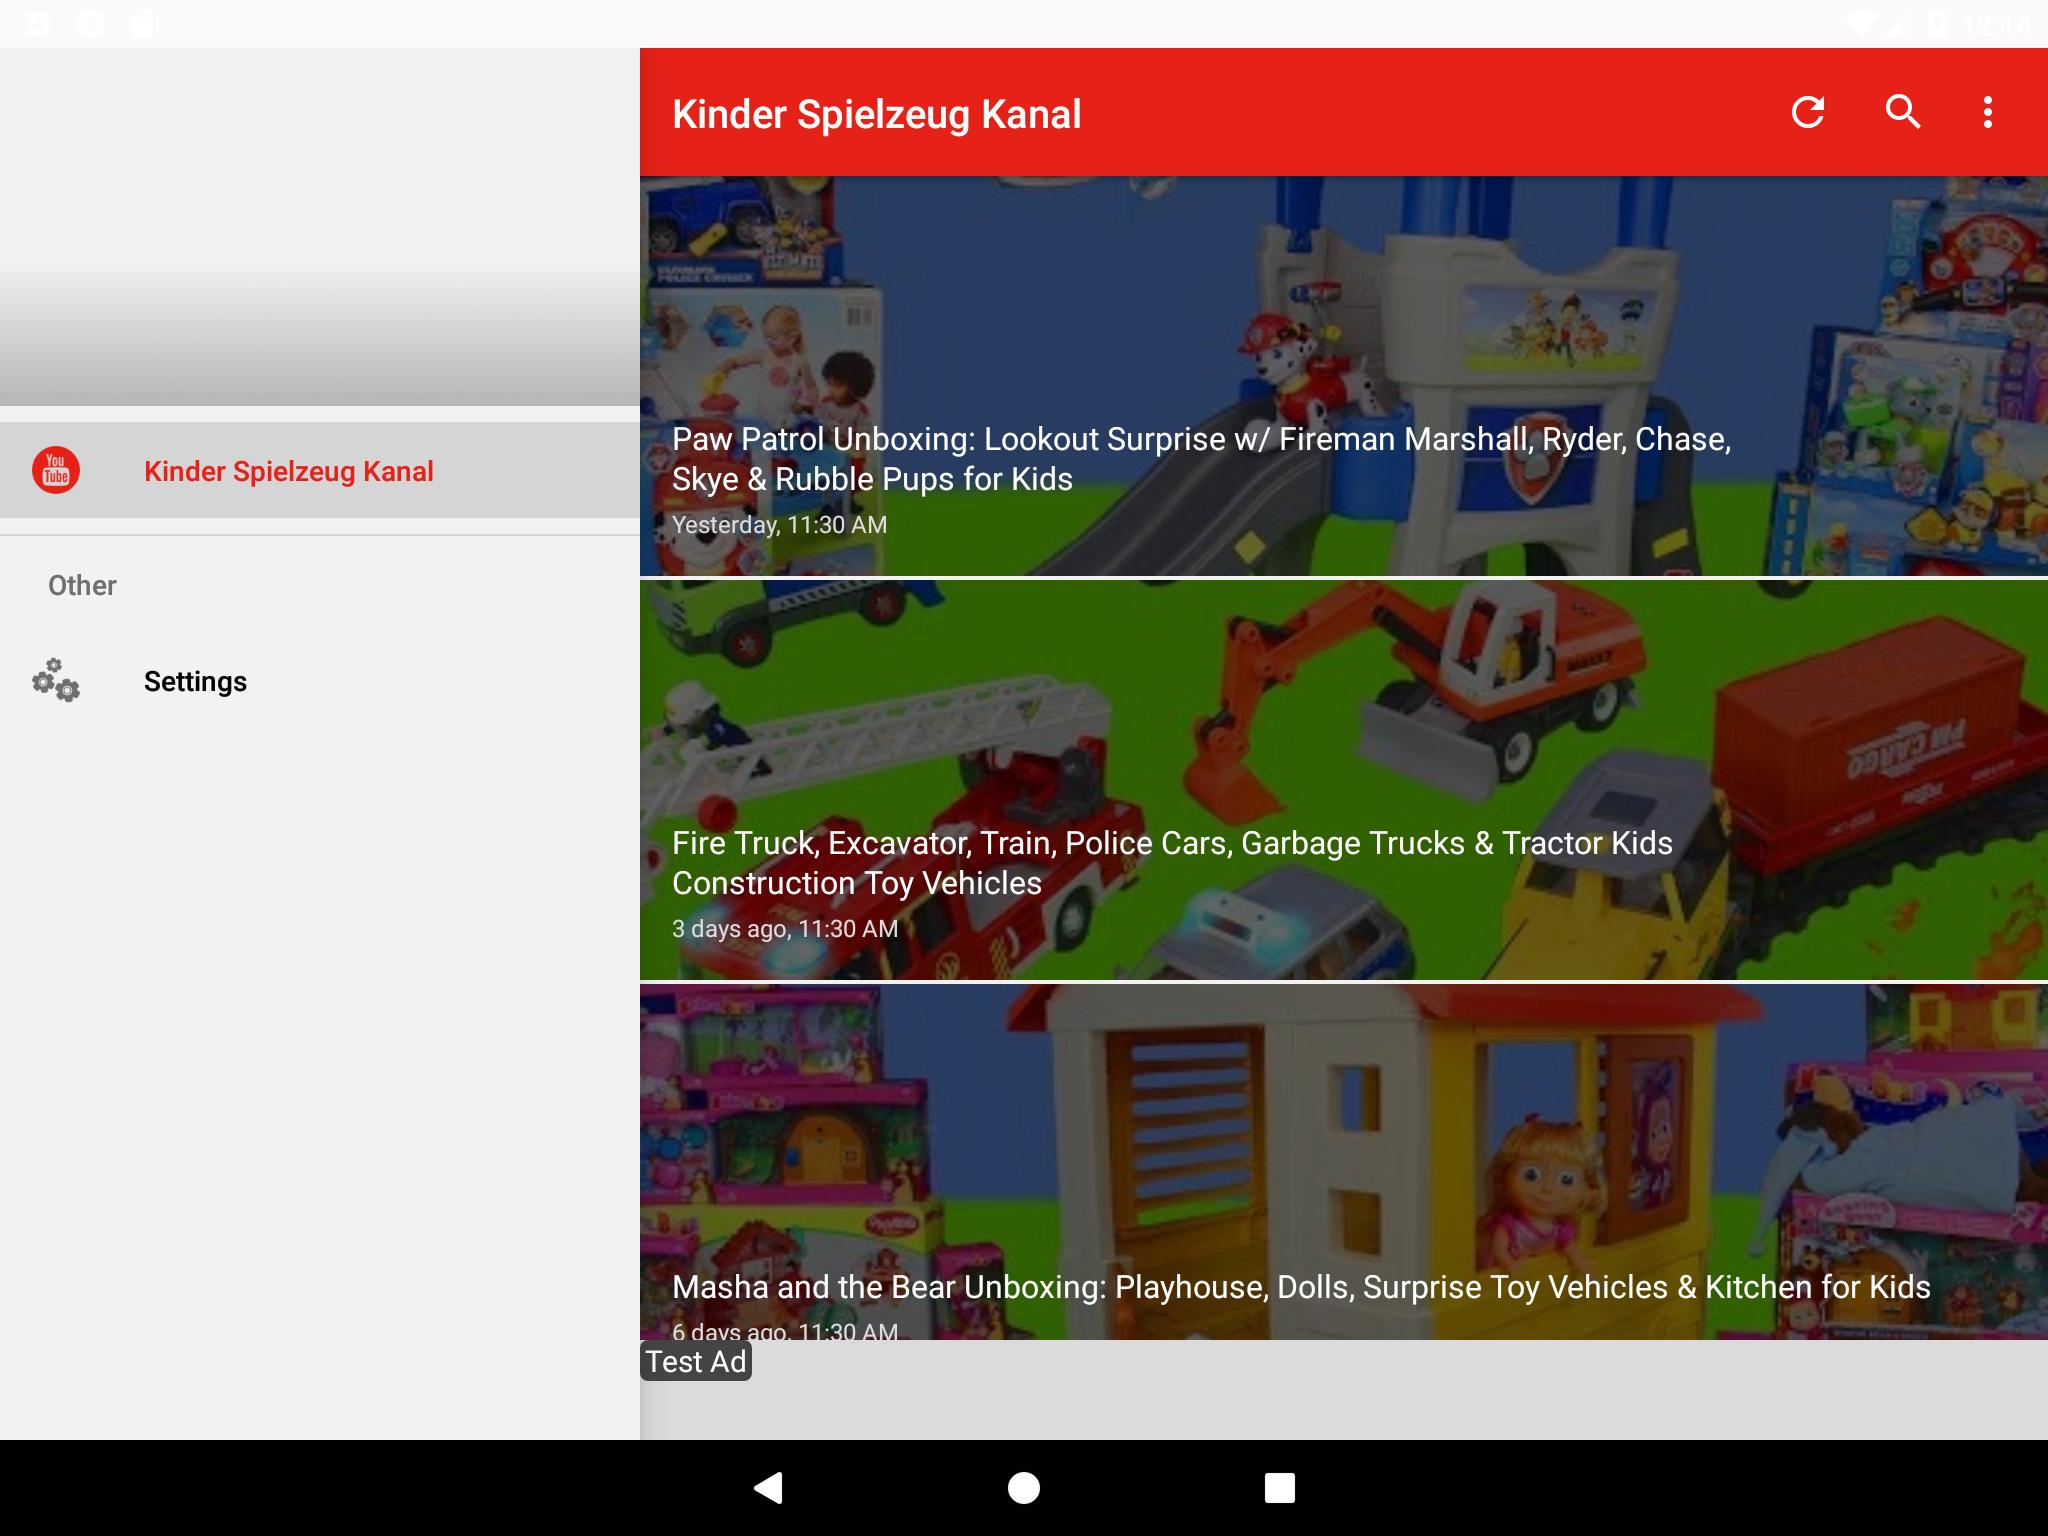 Kinder Spielzeug Kanal for Android - APK Download